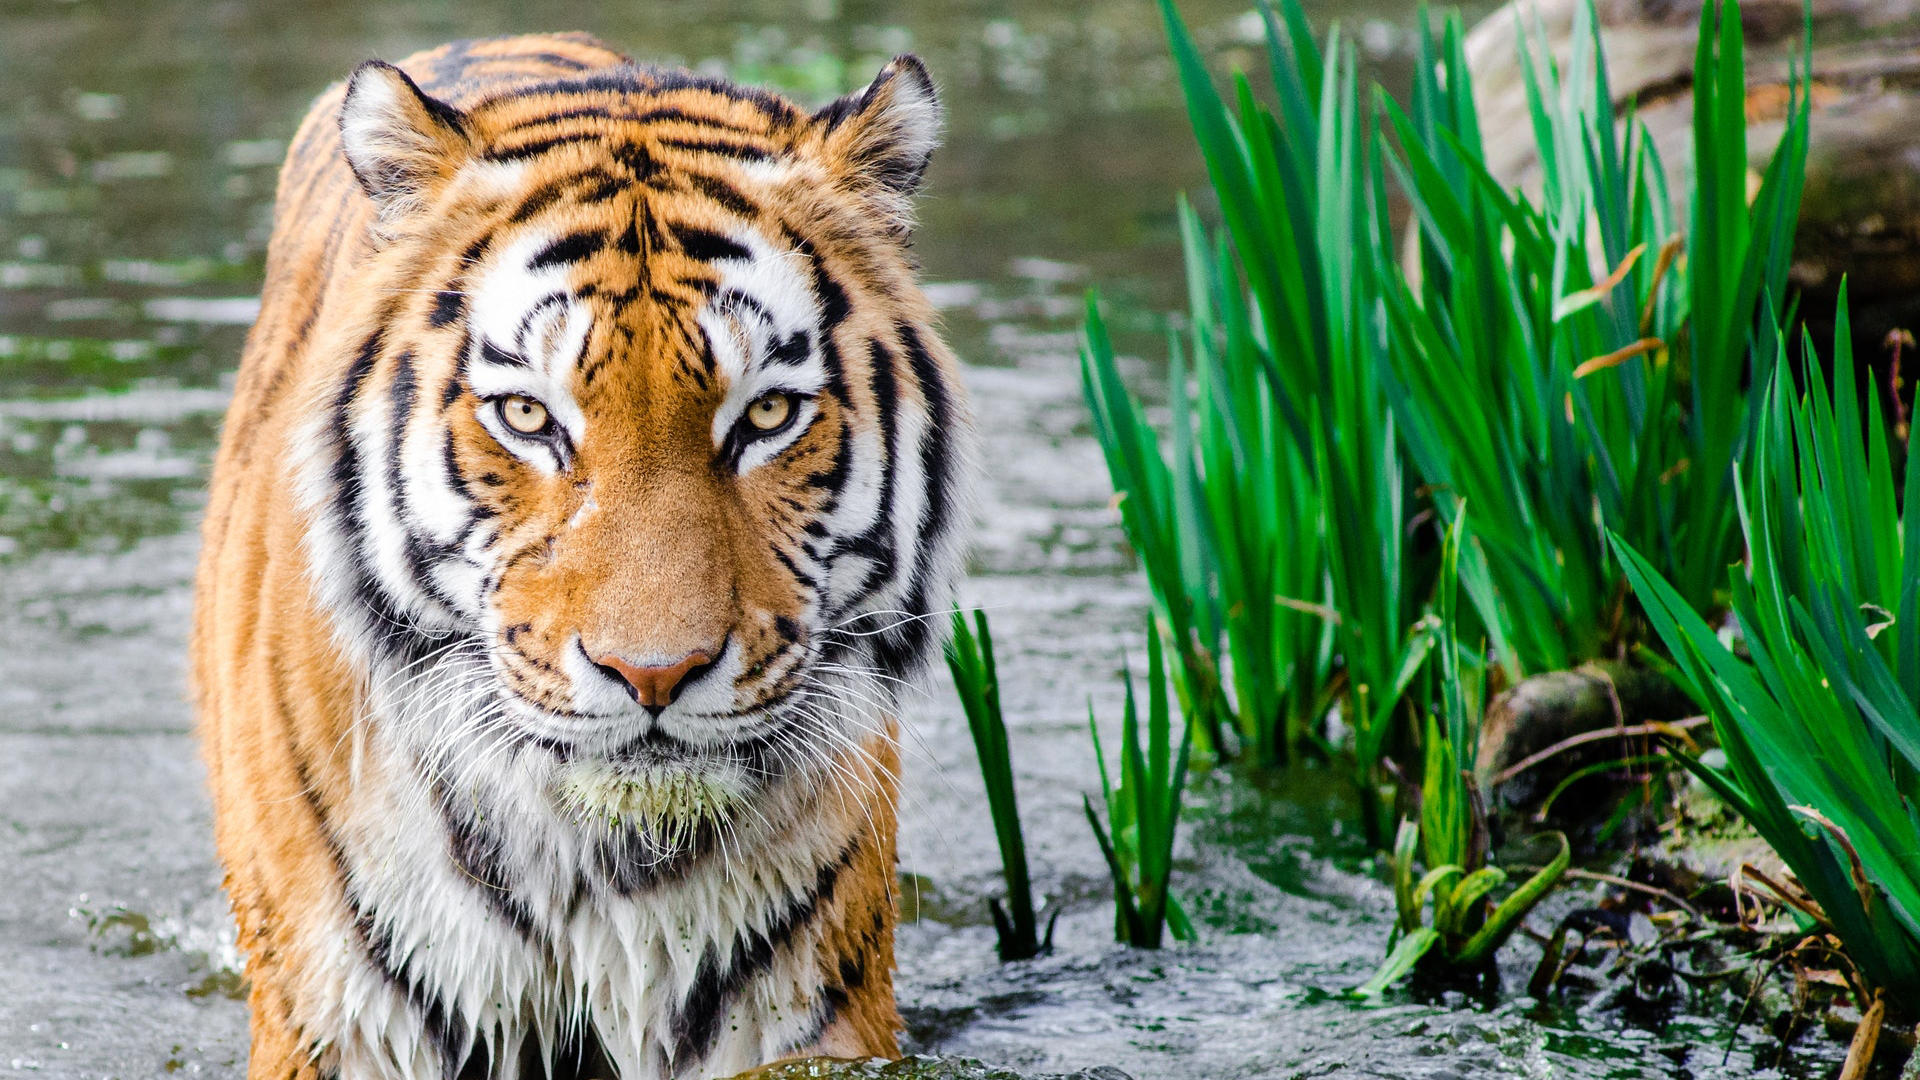 Tiger Is Standing On Water With Grasses Nearby 2K Tiger